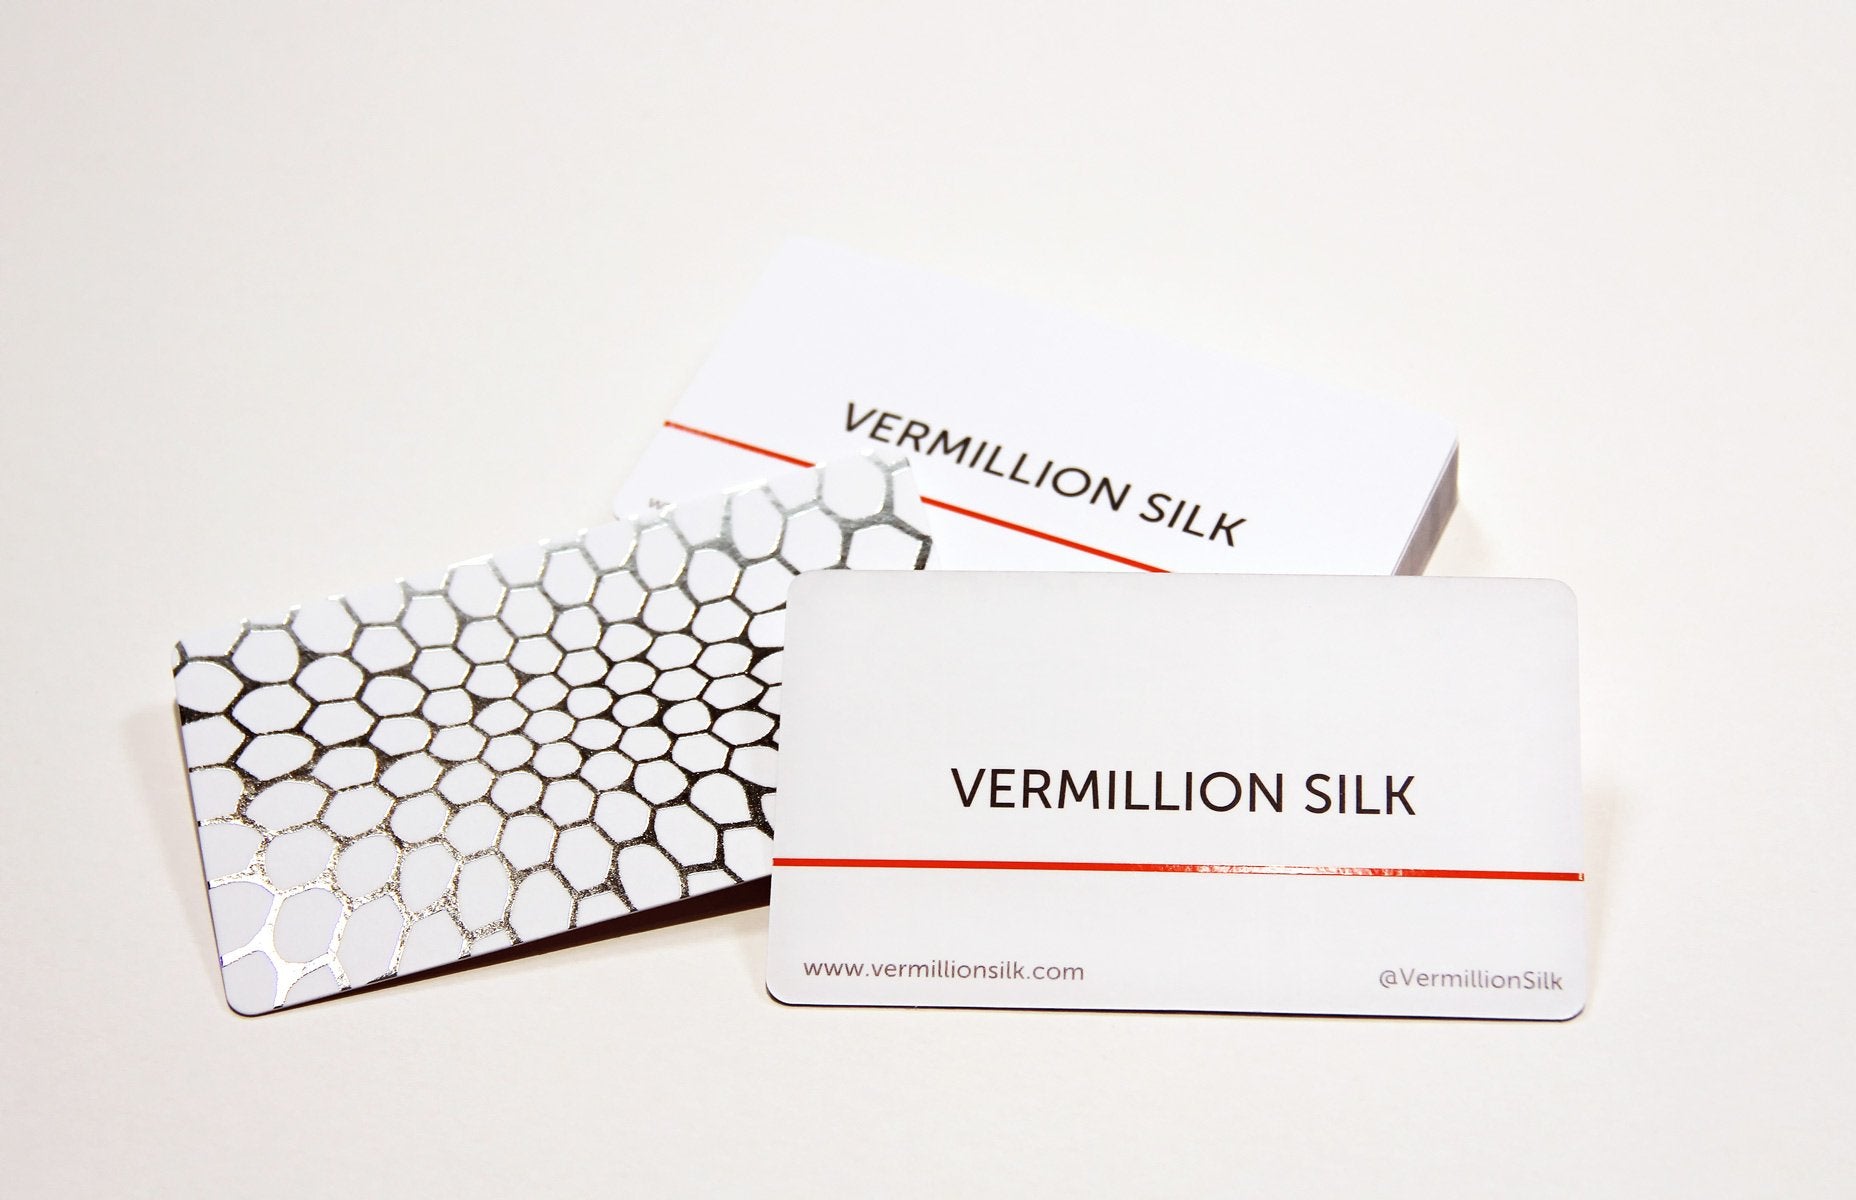 Luxury Business Cards That Help You Stand Out